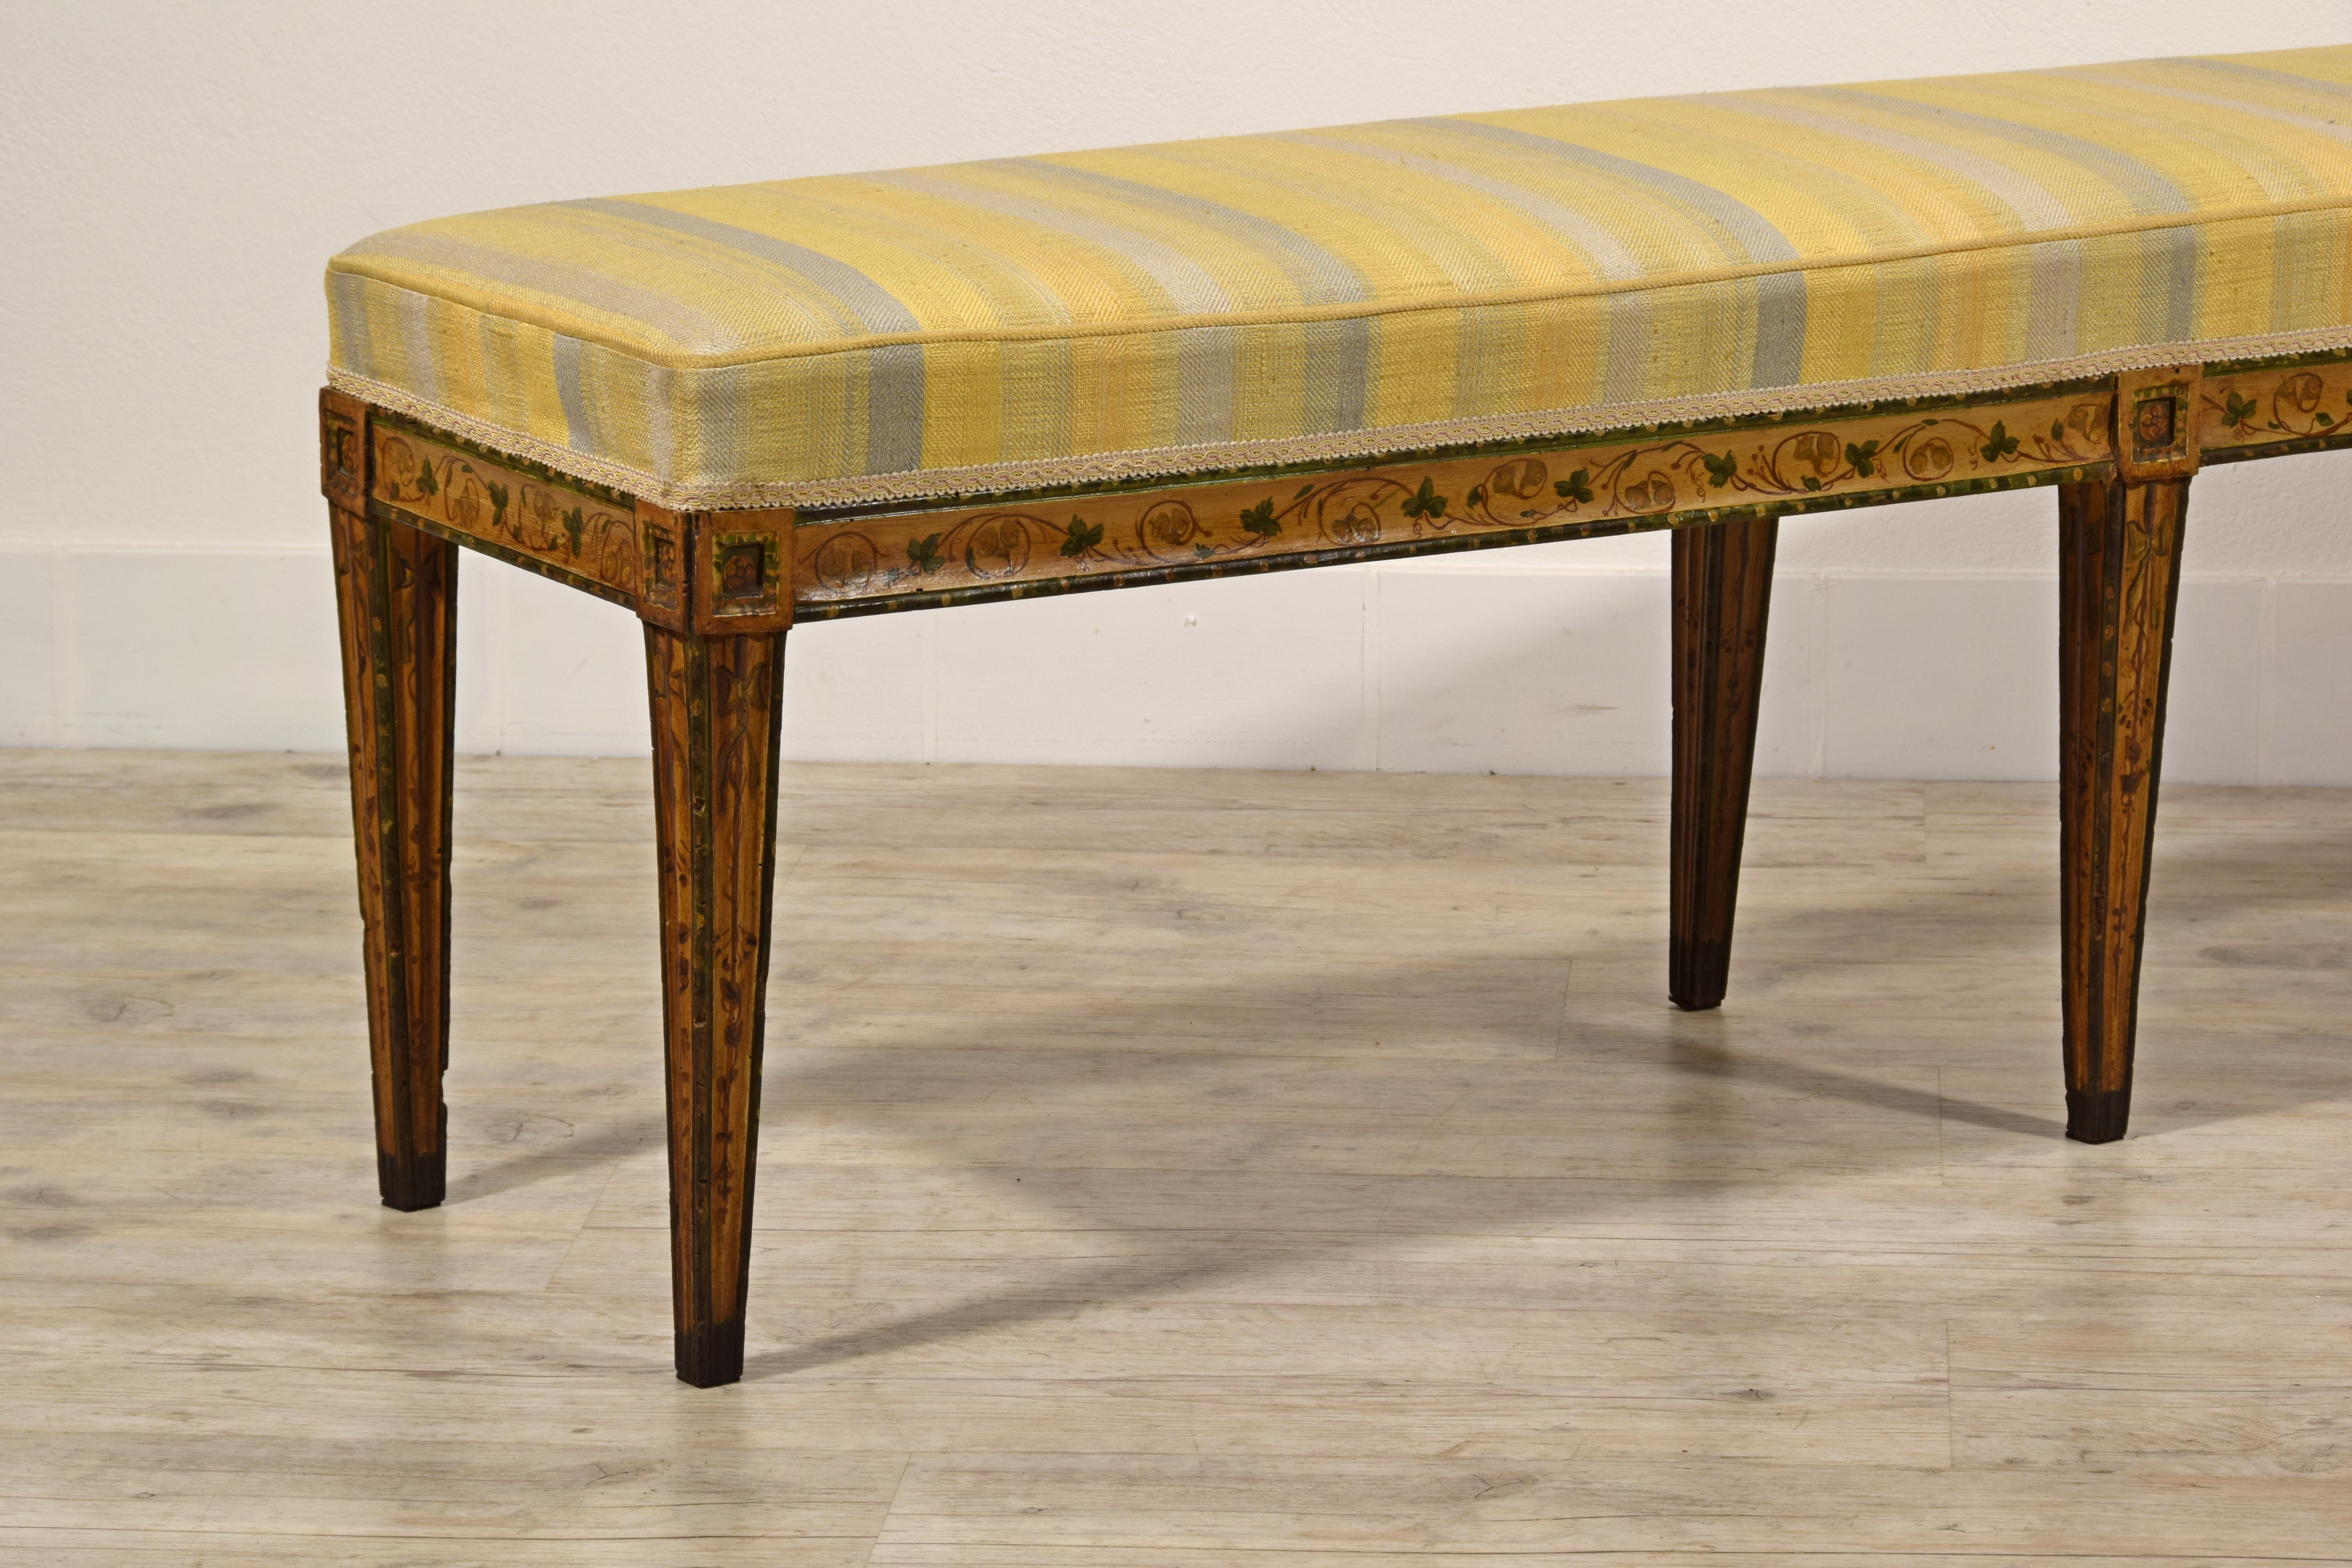 19th Century, Italian Six-legged Centre Bench Lacquered Wood with Ramage Motive 9